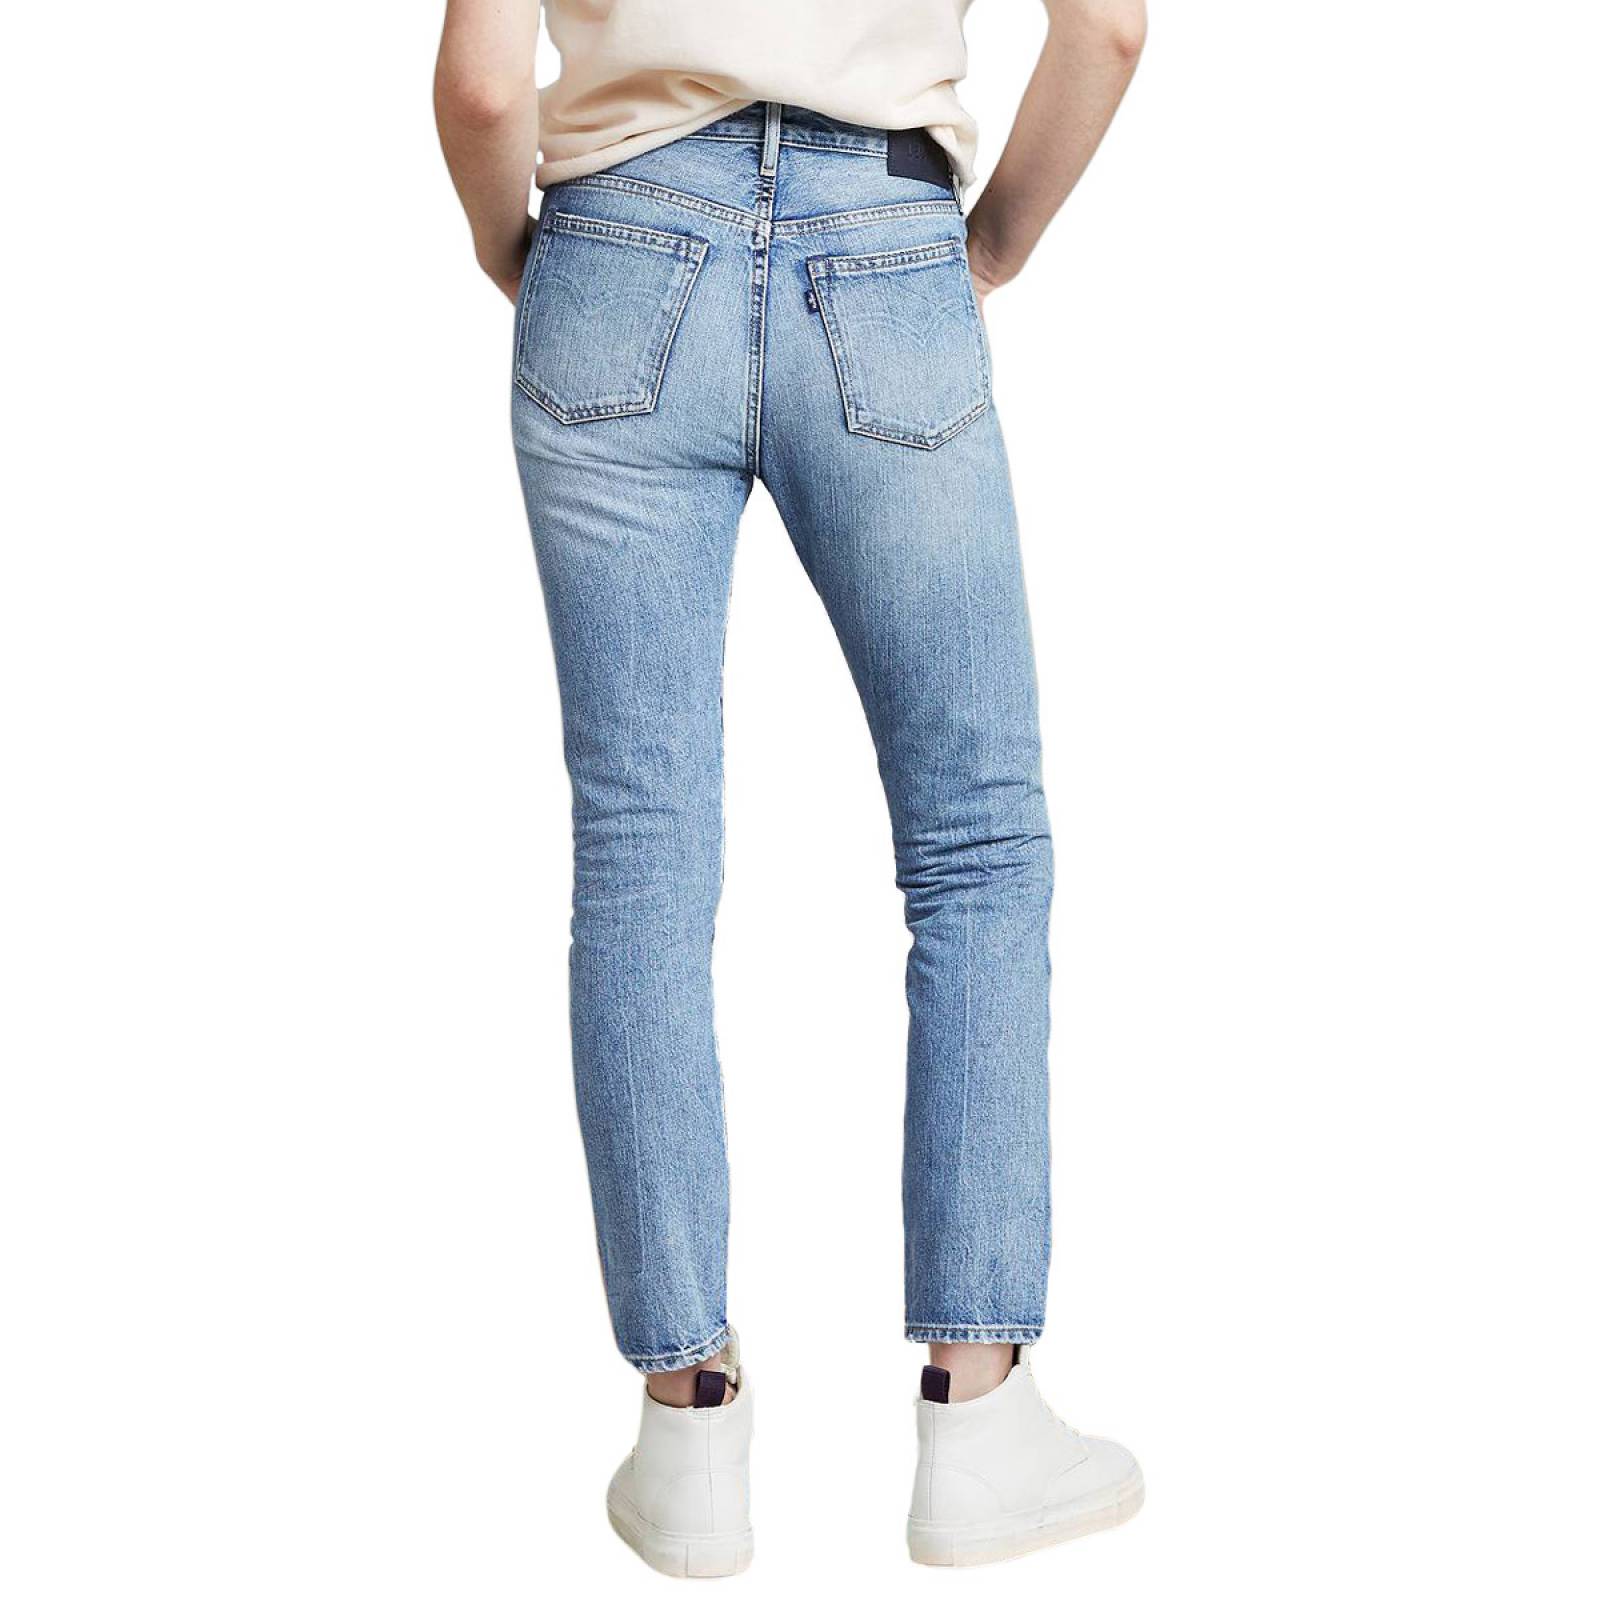 Jeans Twig High Slim II Levis Made & Crafted para Dama